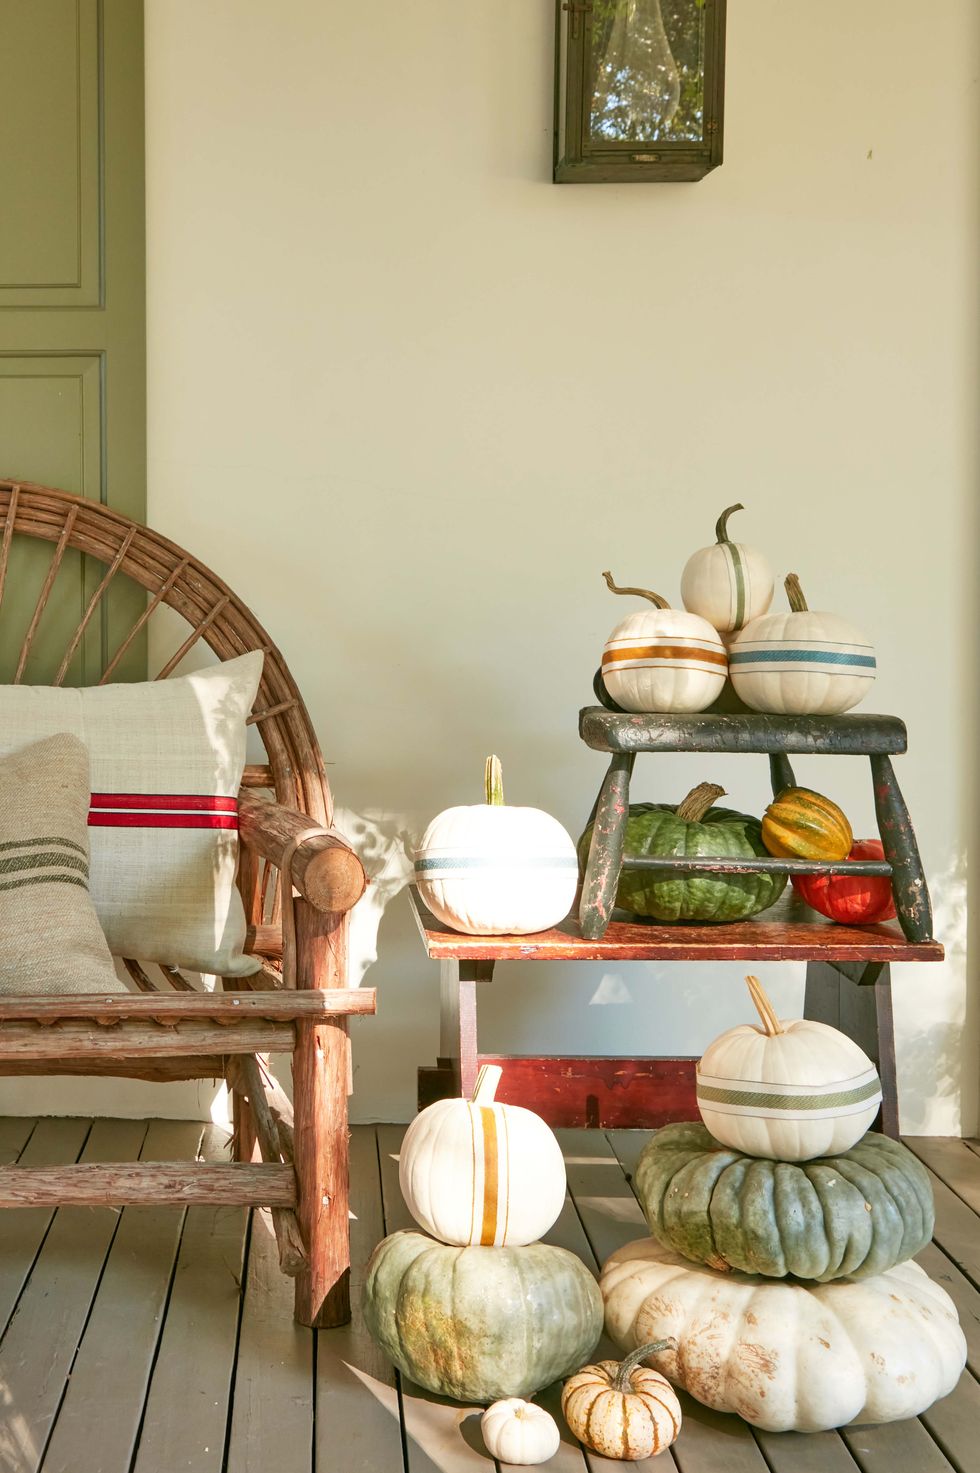 fall front porch decor featuring pumpkin stacks adorned with ribbon stripes beside bench with grain sack covered pillows